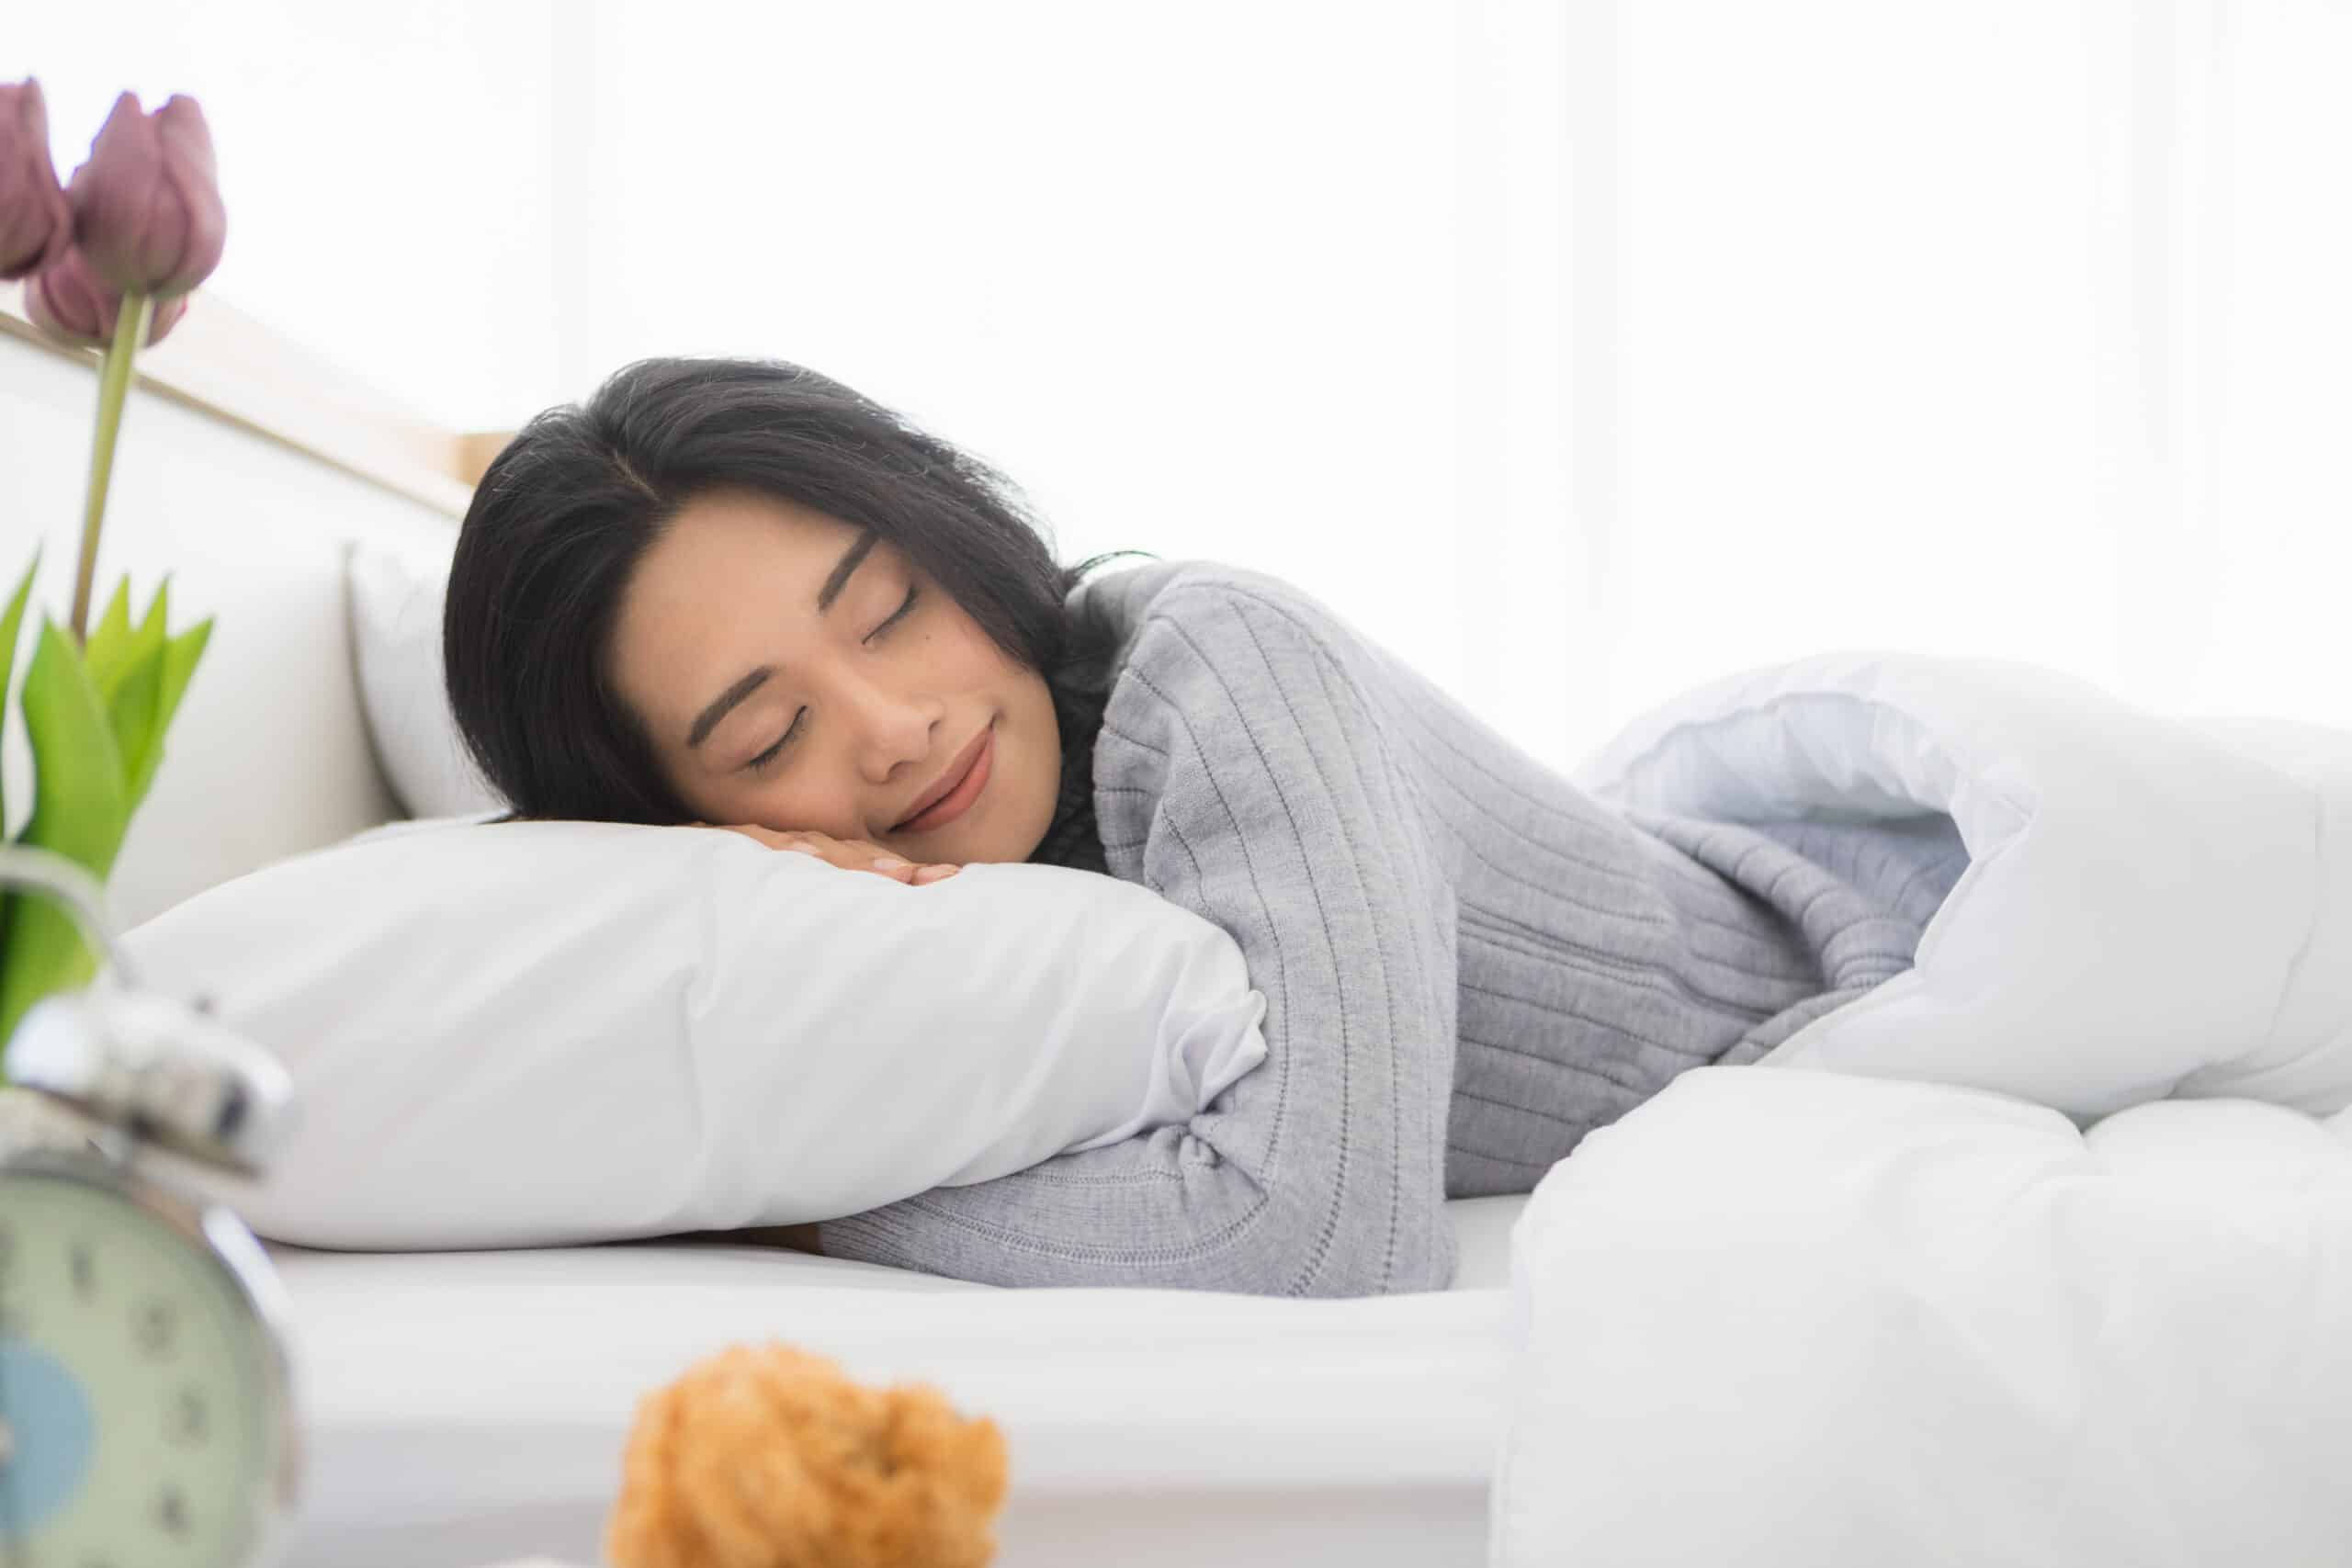 Quality sleep supports healthy weight loss.